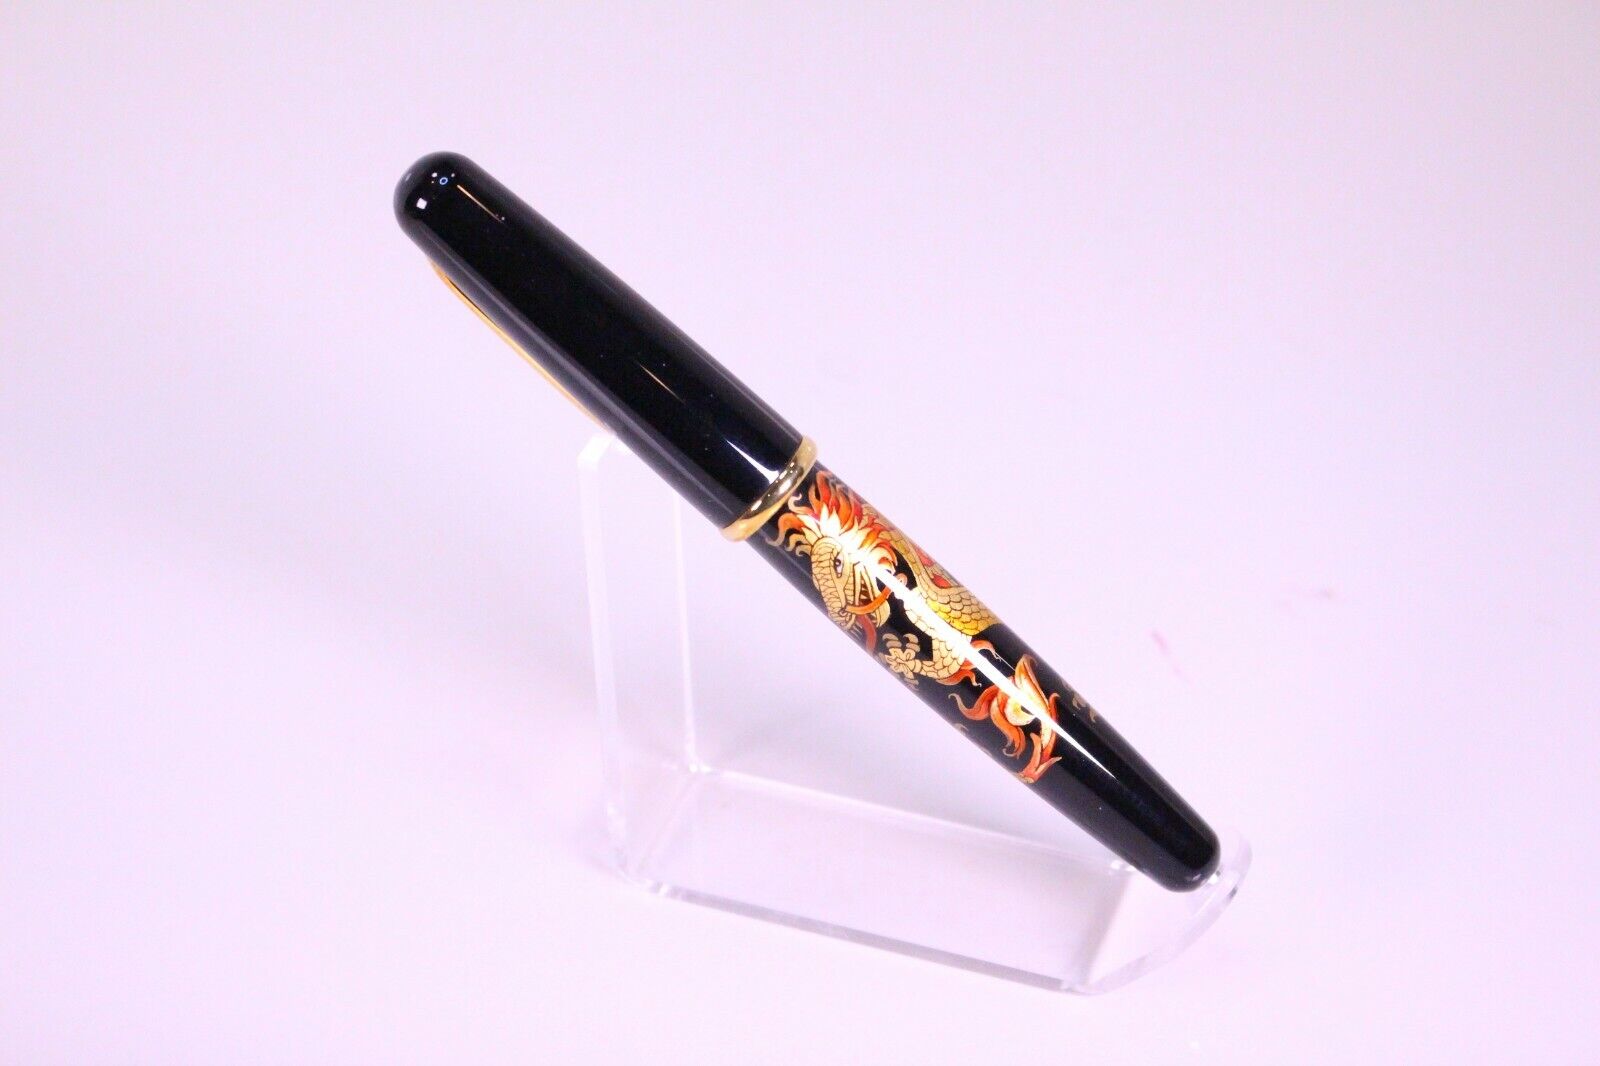 Stipula Etruria Legend of the Five Toed Dragon rollerball Black Resin New